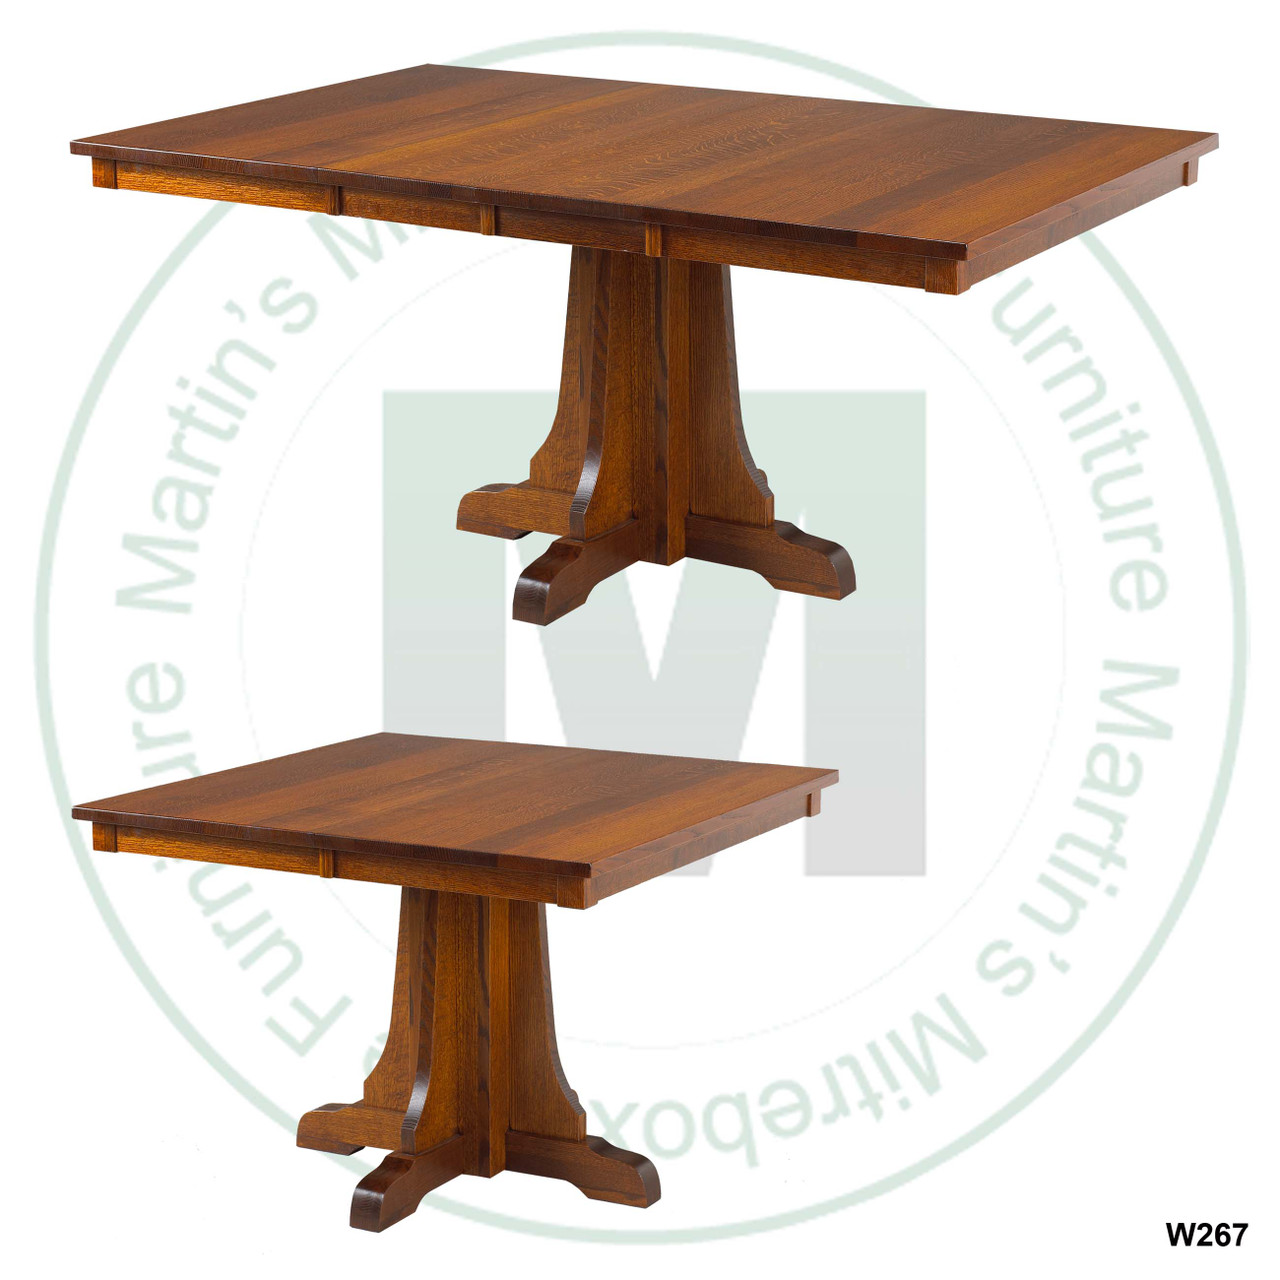 Maple Eastwood Single Pedestal Table 36''D x 48''W x 30''H With 2 - 12'' Leaves